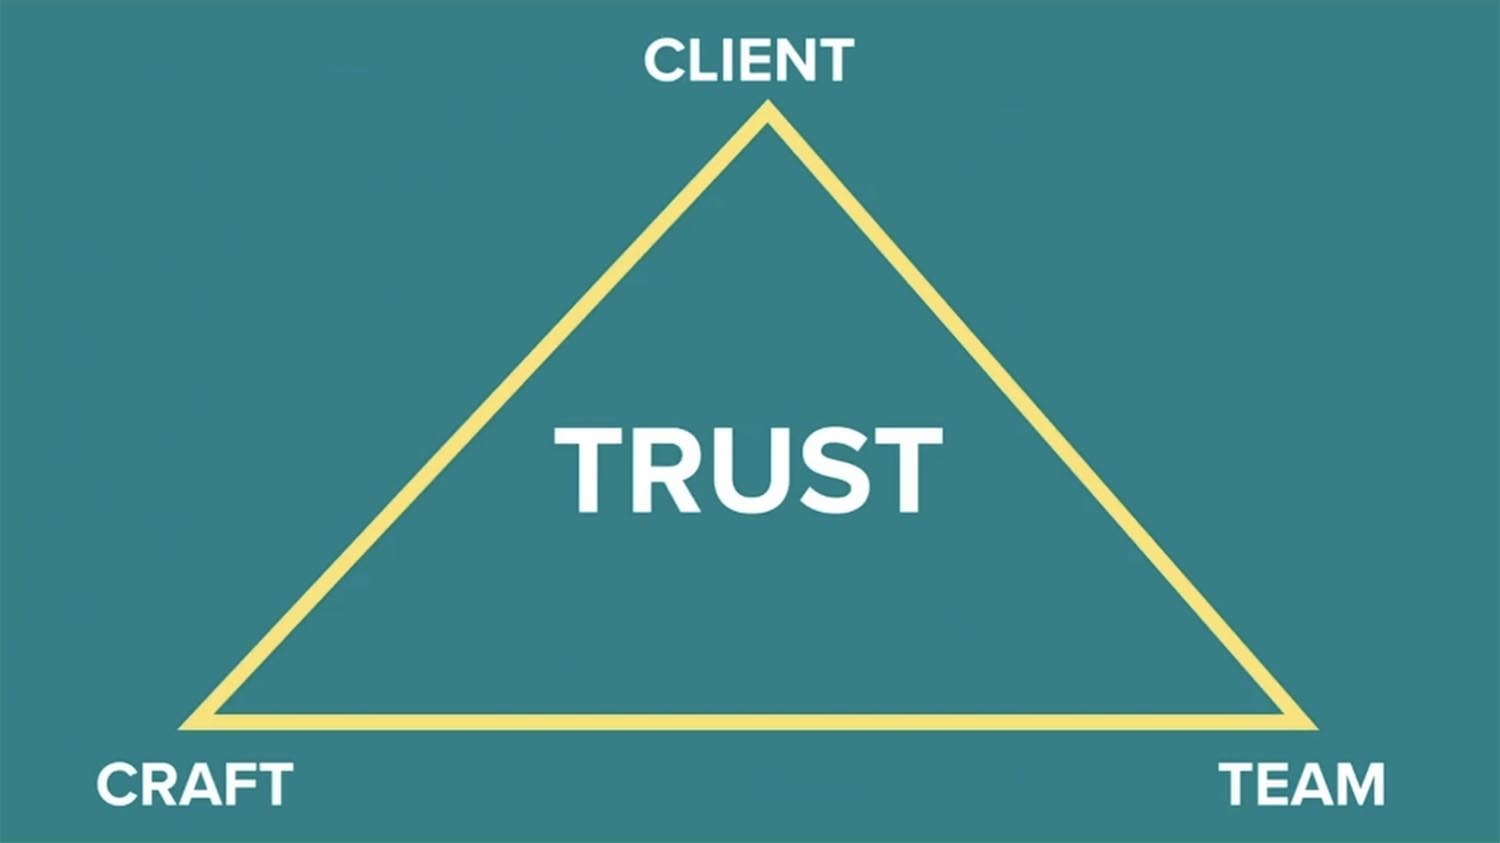 The triangle of trust consists of three corners: craft, team, and clients.